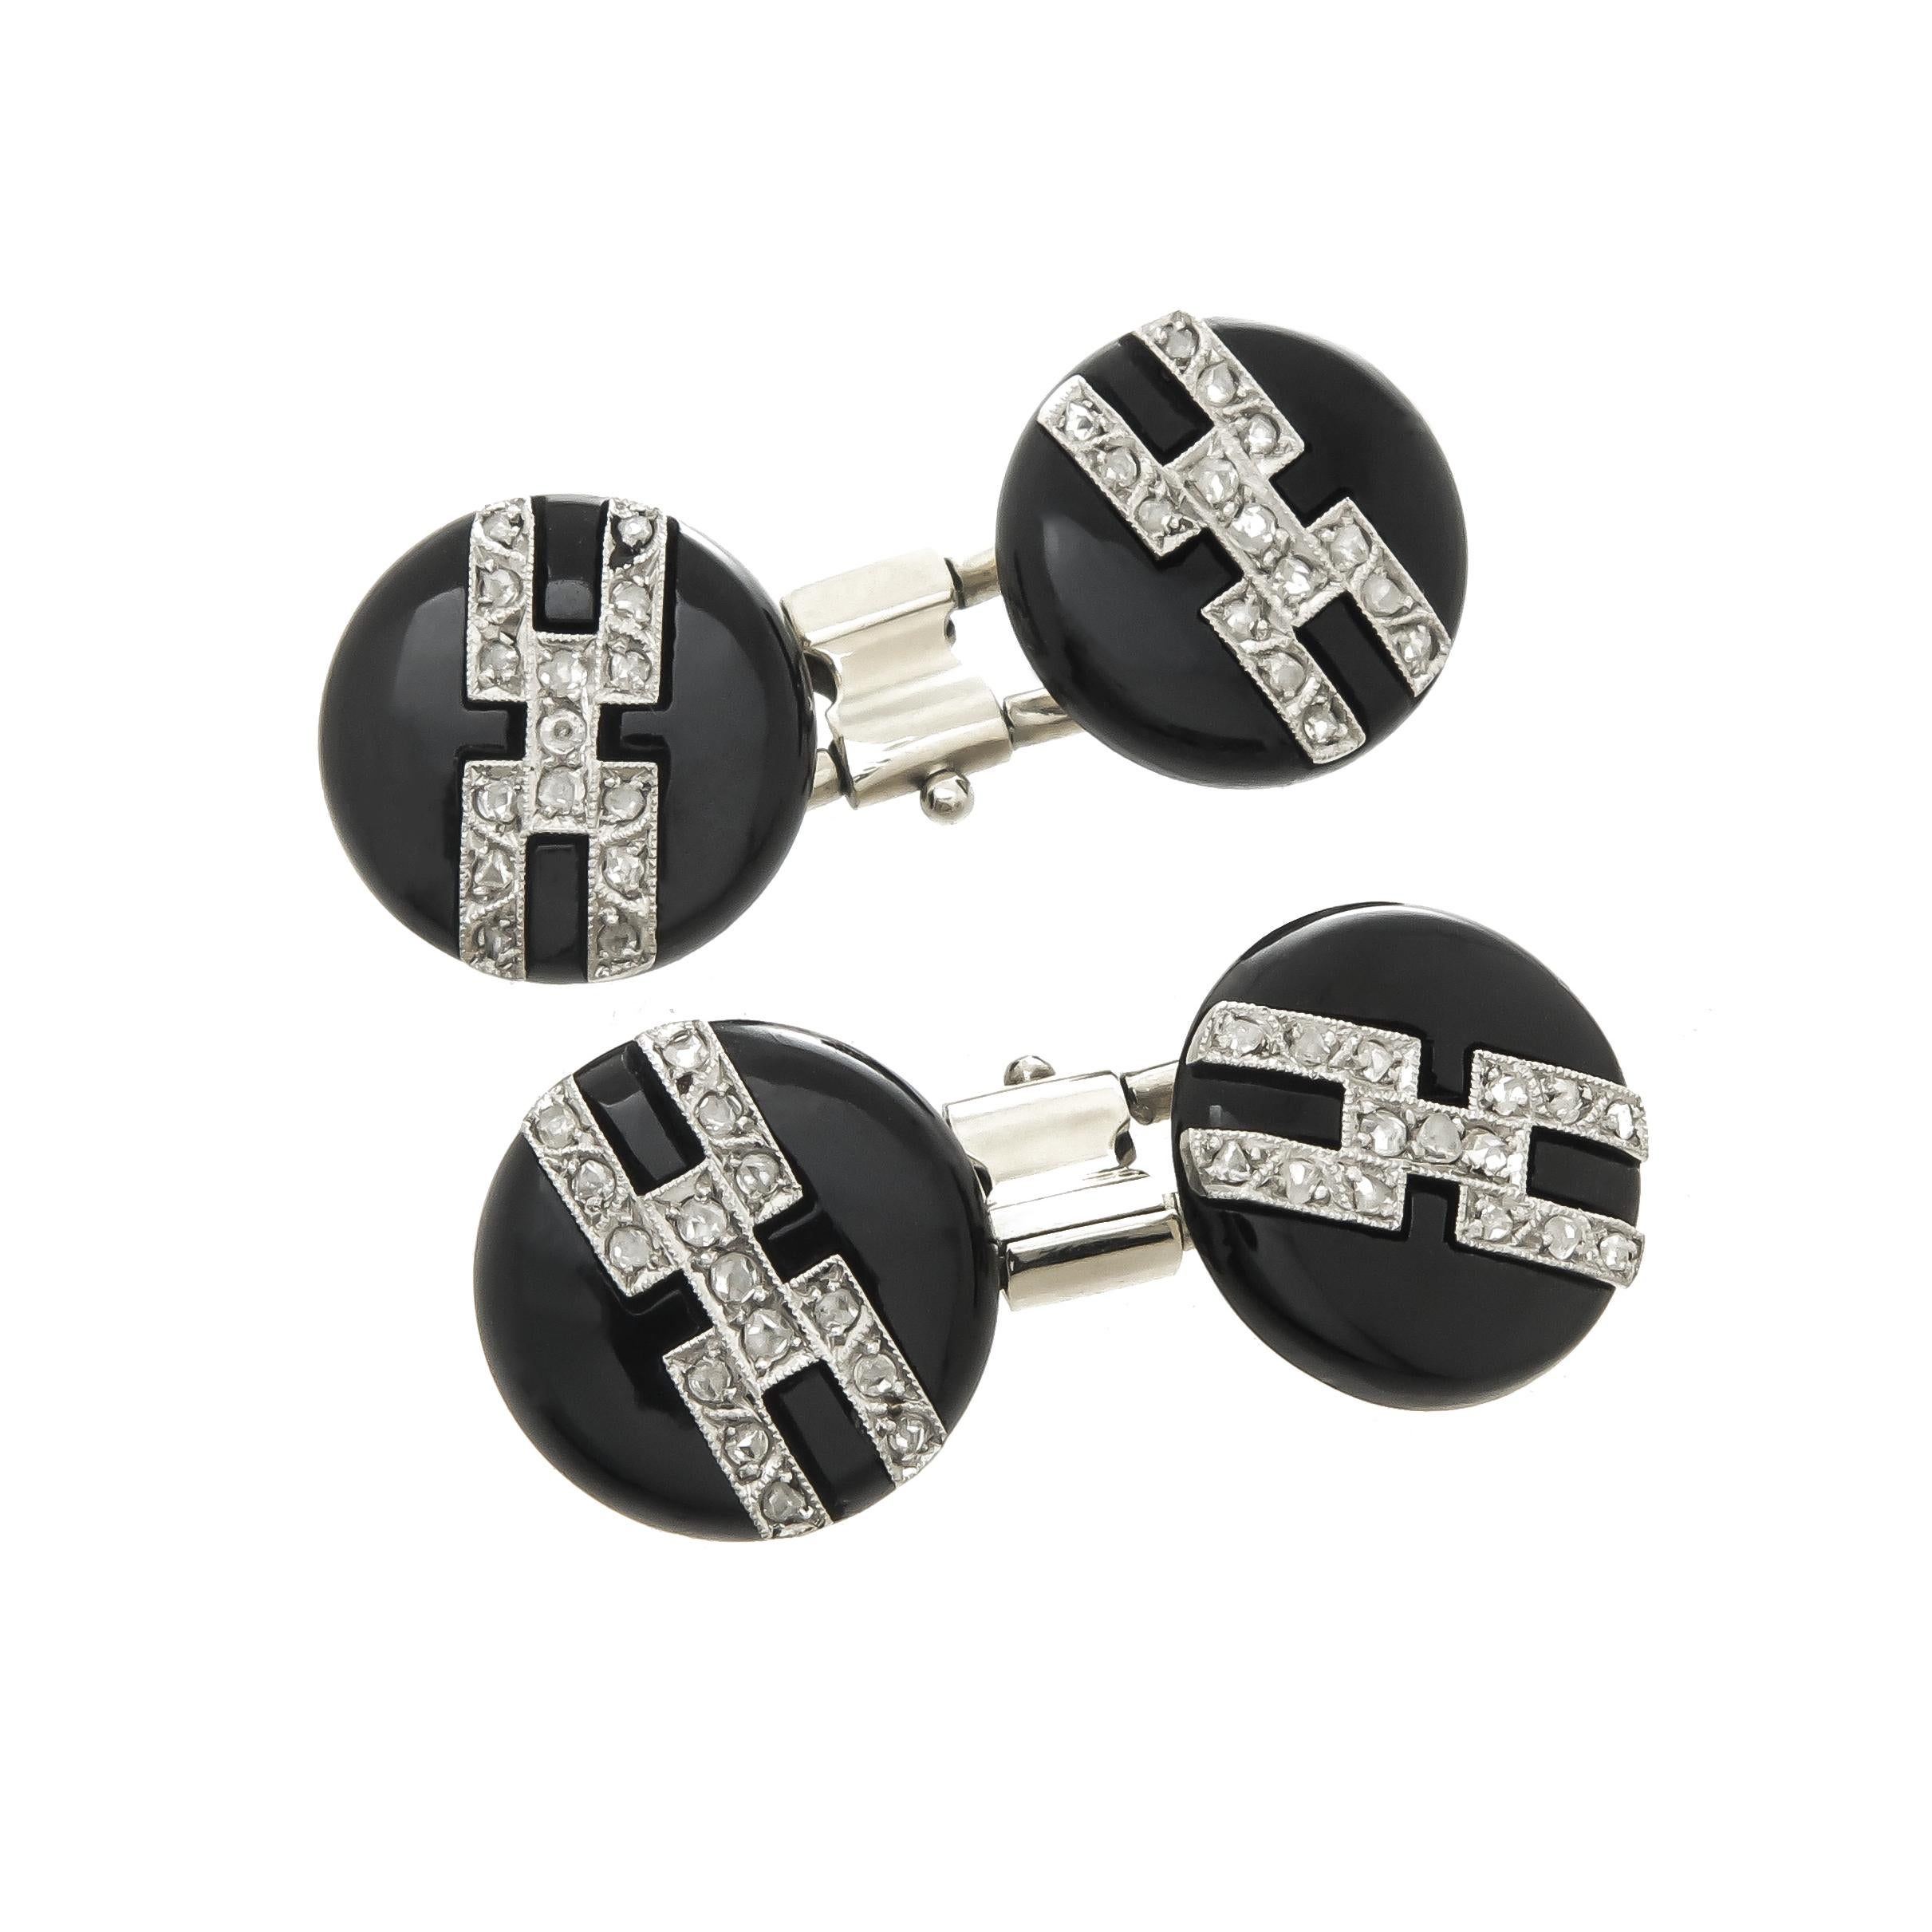 Circa 1930 Tuxedo dress set, comprising of Cufflinks, Shirt studs and 2 vest studs, Platinum tops on Onyx, set with Rose cut Diamonds, White gold backs, the Cufflinks and Shirt studs measure 1/2 inch in diameter. original fitted leather box with